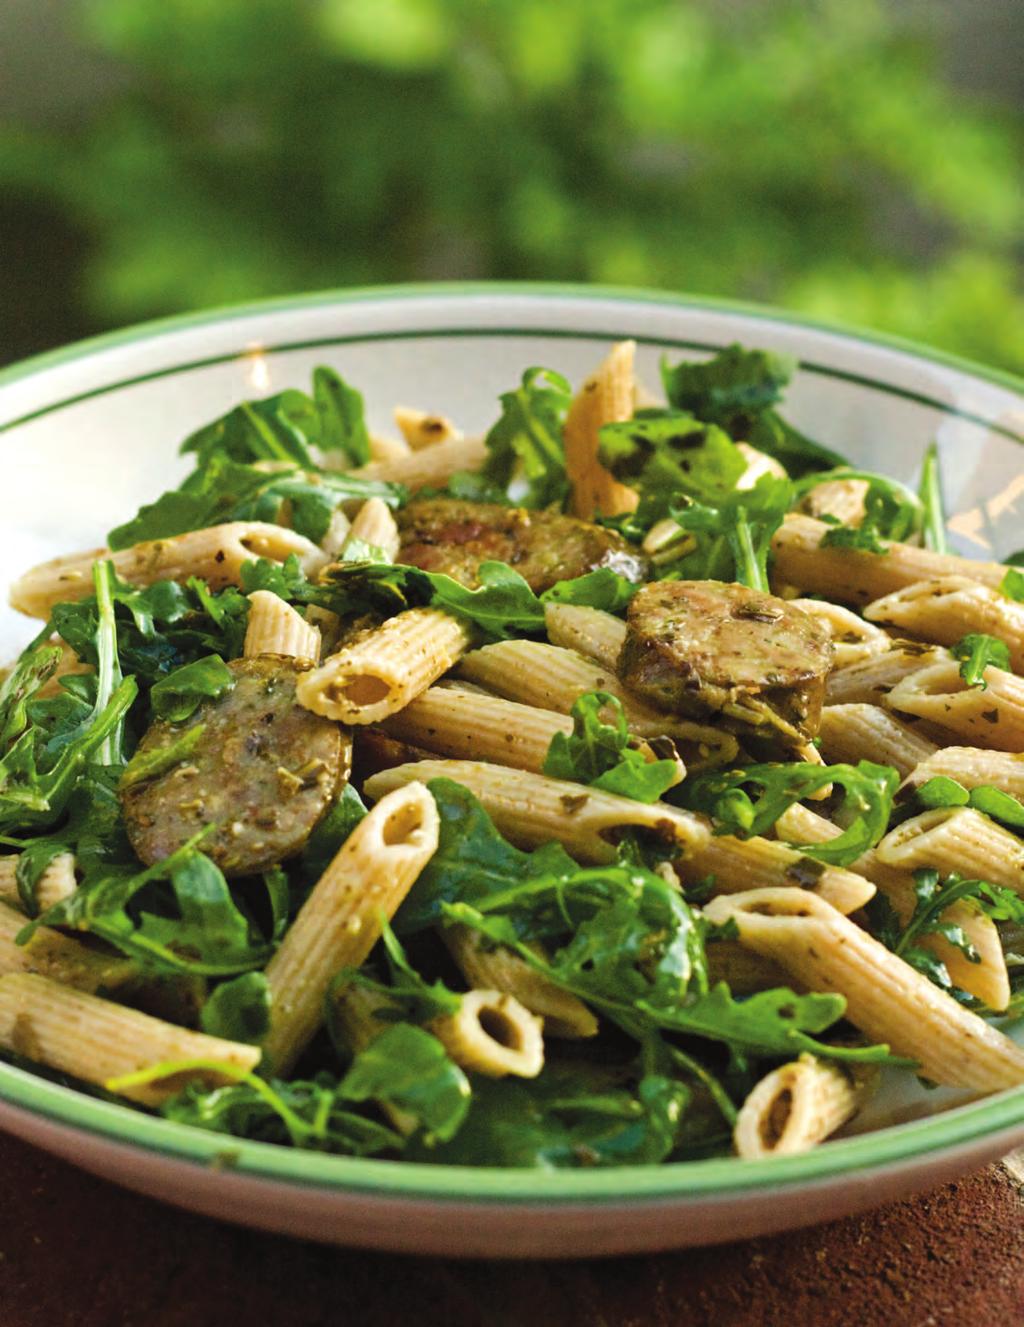 Arugula Pesto Pasta Pesto, a blend of basil, nuts, Parmesan and olive oil, is a cornerstone of Italian cooking, used generously to add flavor to a wide variety of dishes.